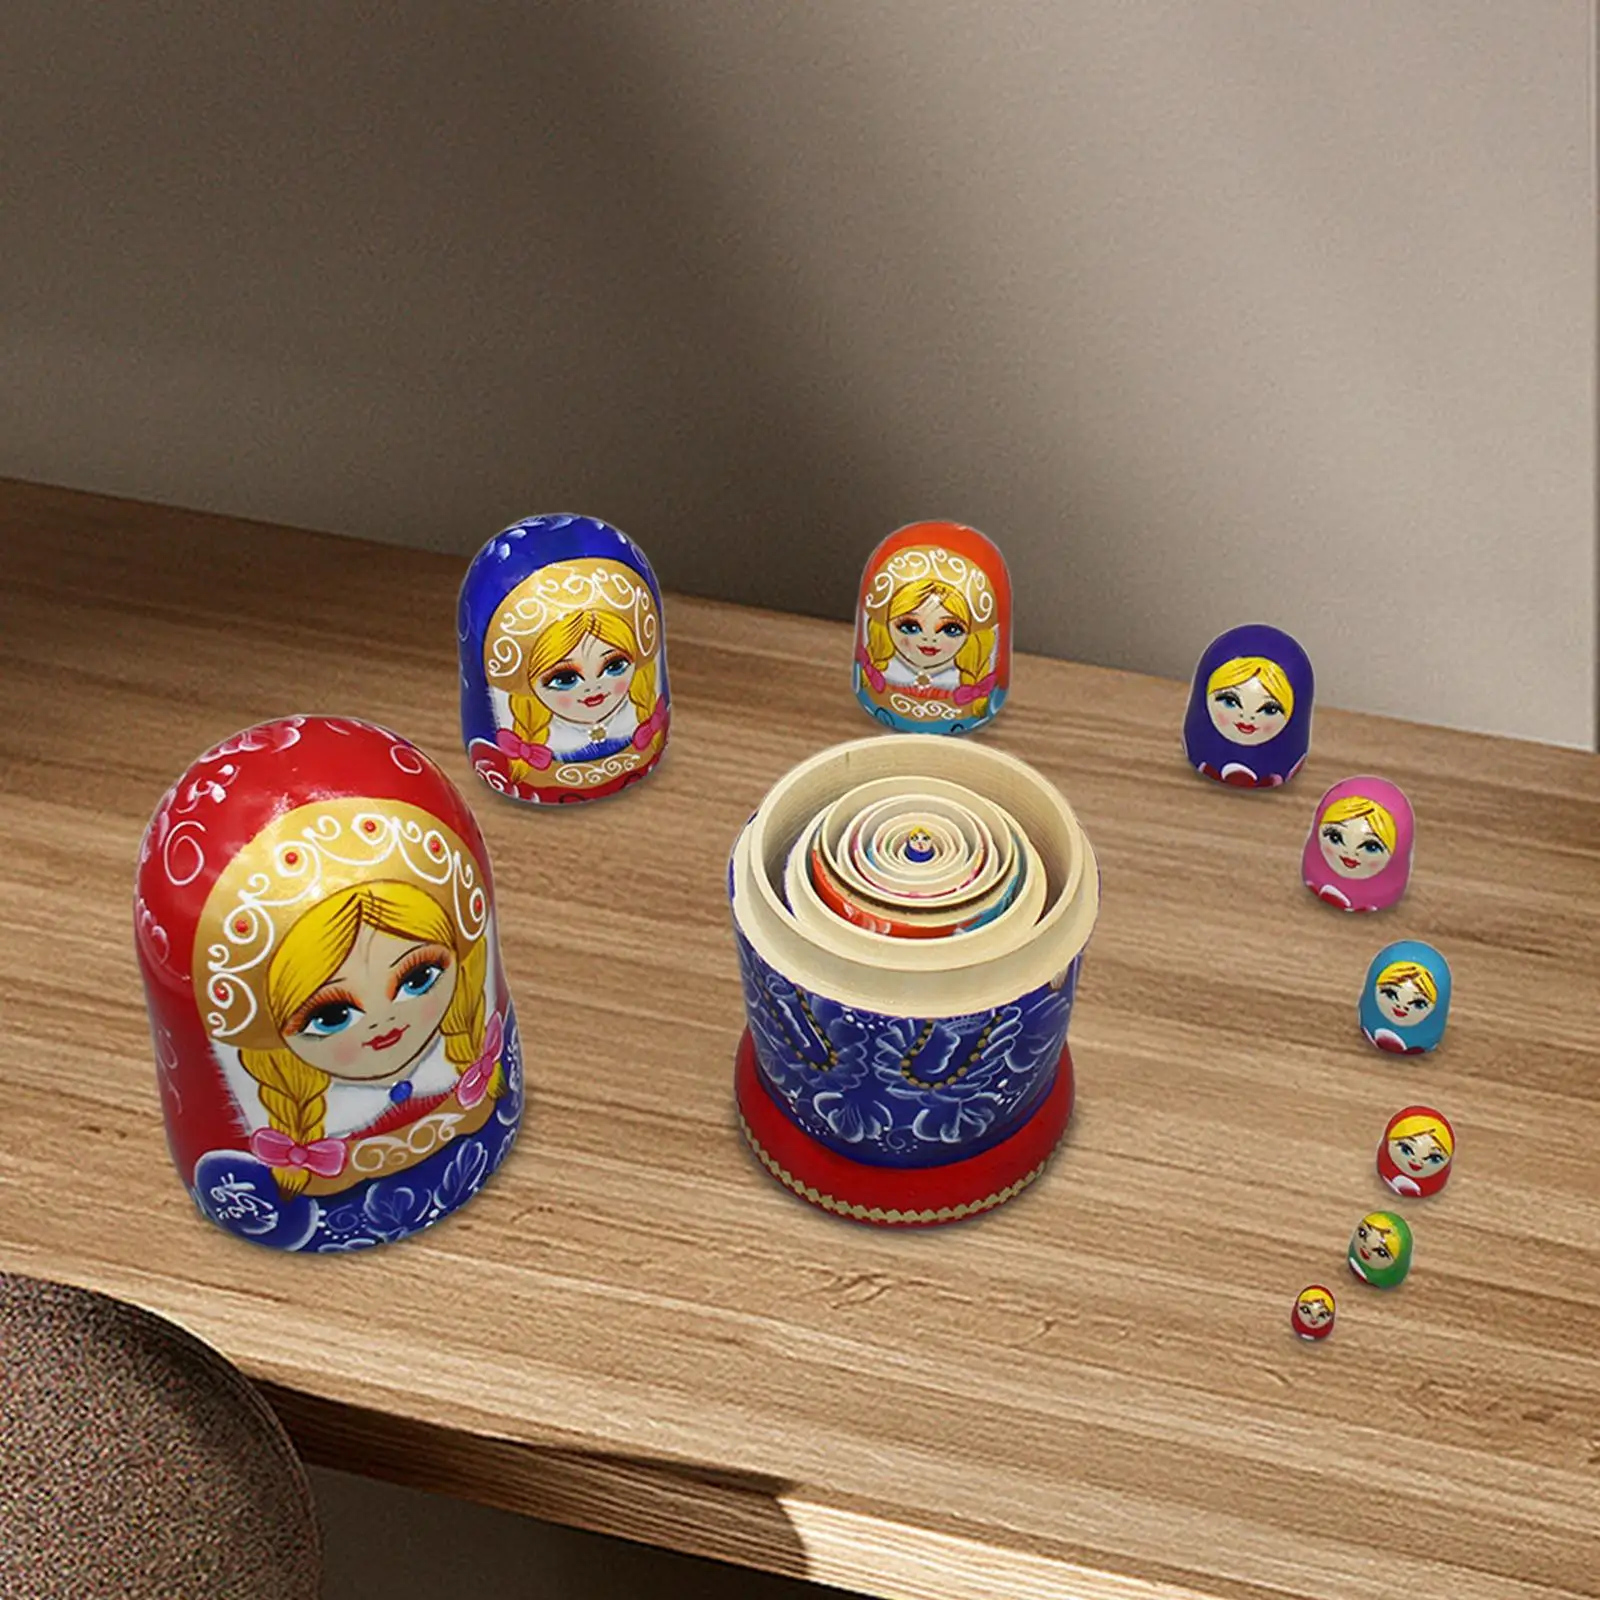 10Pcs Cartoon Russian Nesting Doll Matryoshka Doll Wood Stacking Toy Collectible Ornament Nesting Doll for Table Room Office